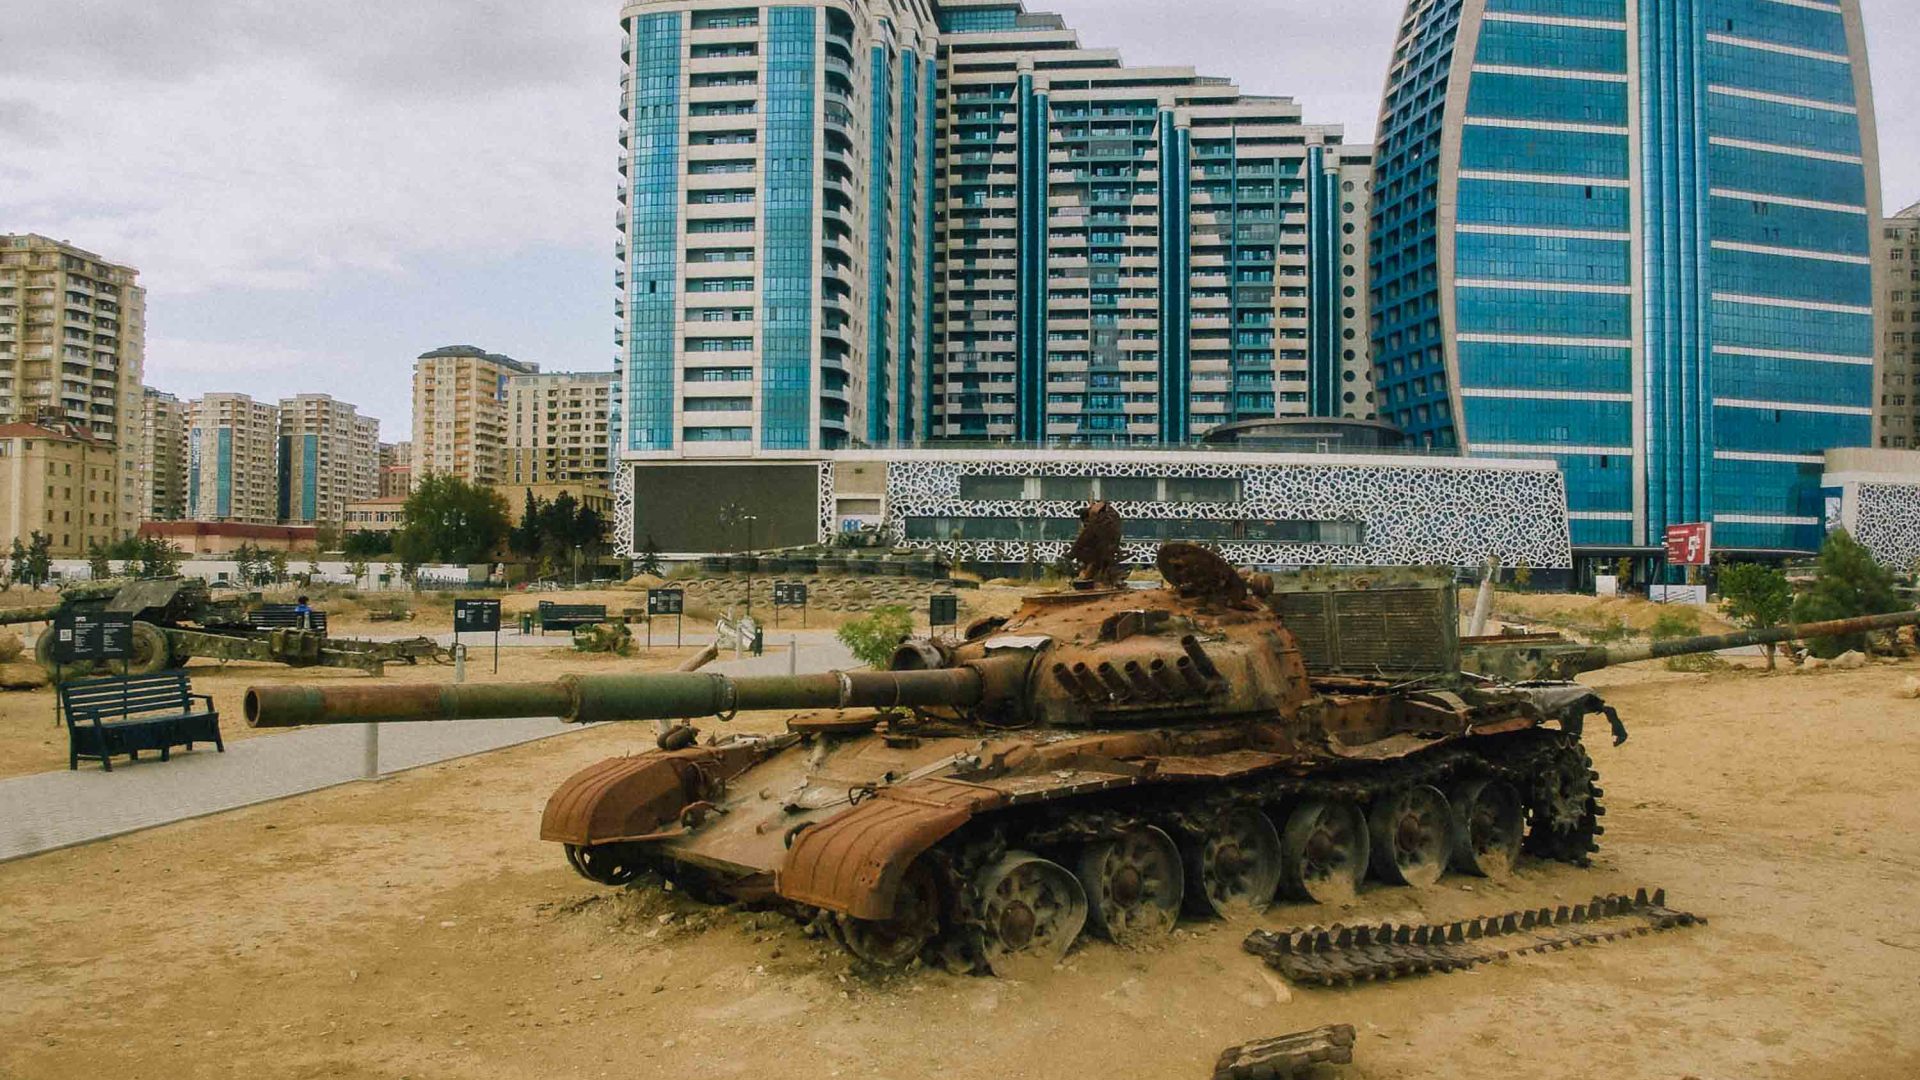 An ex tank in the foreground and the city in the background.